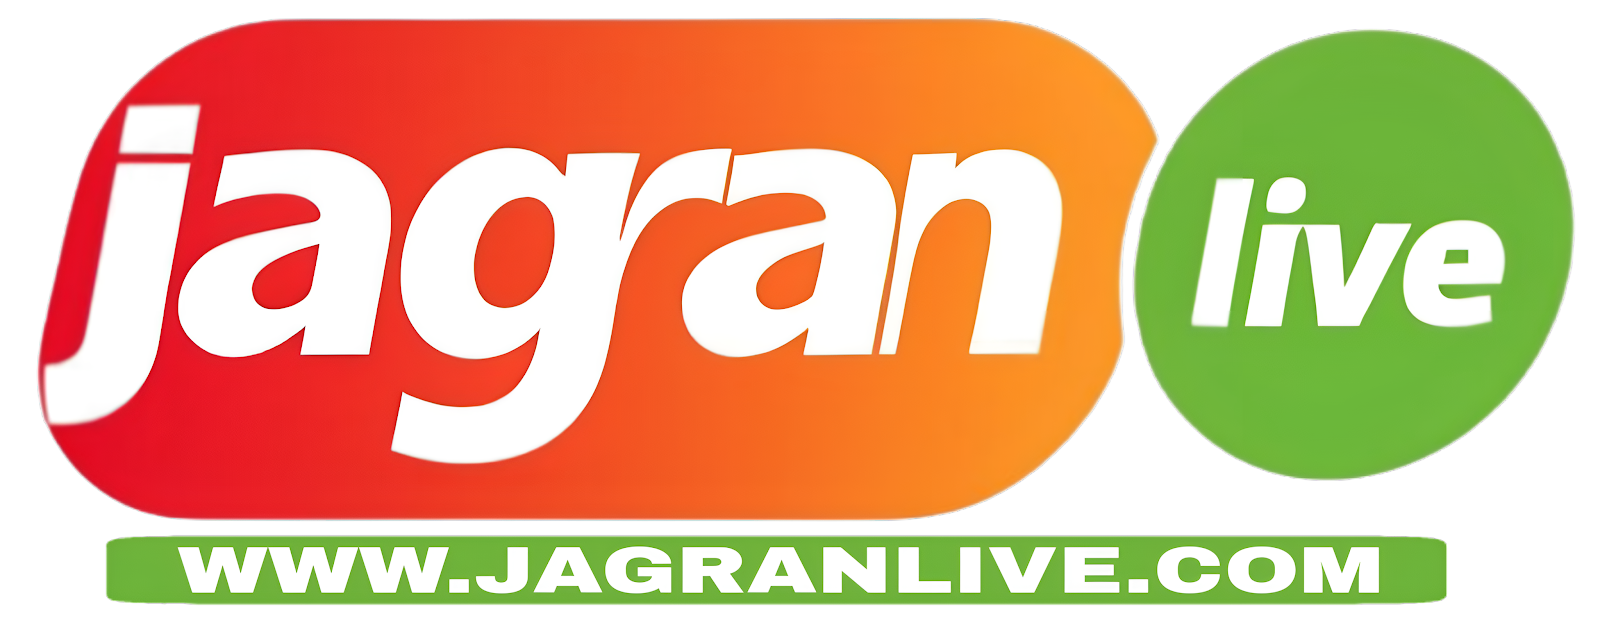 "Jagran Live News: Your Gateway to Real-Time Information and Unbiased Journalism"